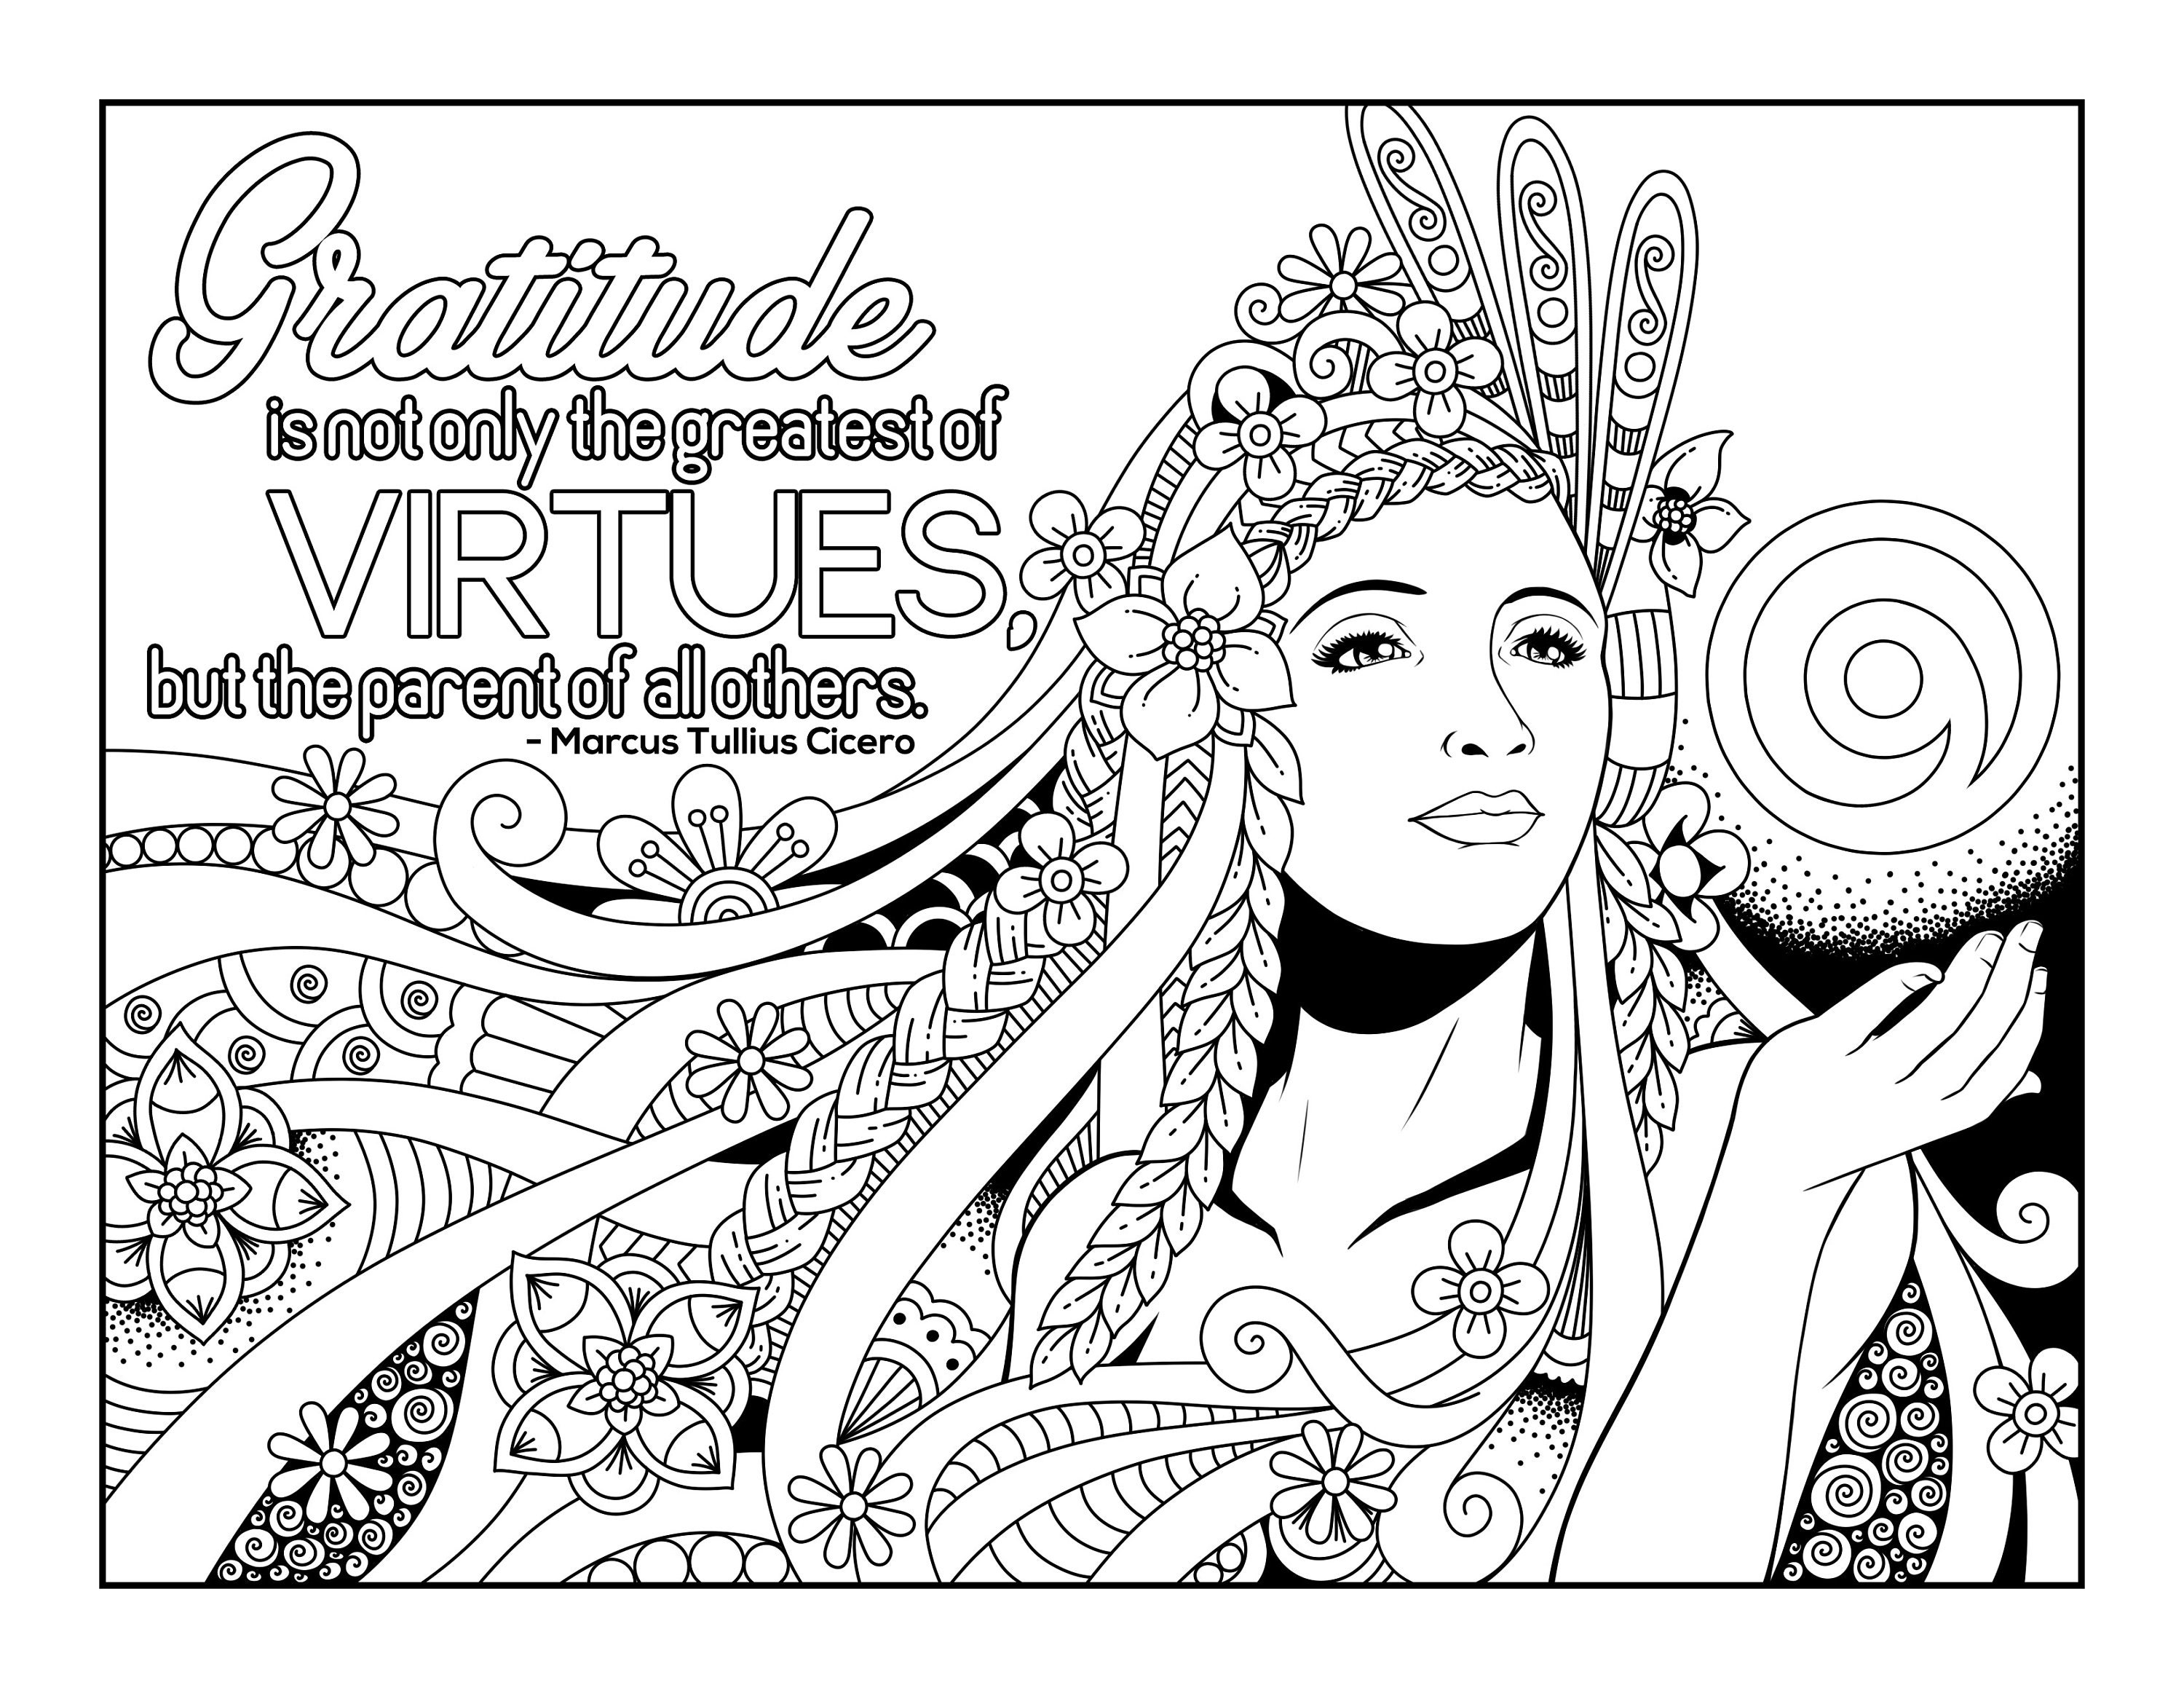 CU Coloring Pages, Health & Wellness Services